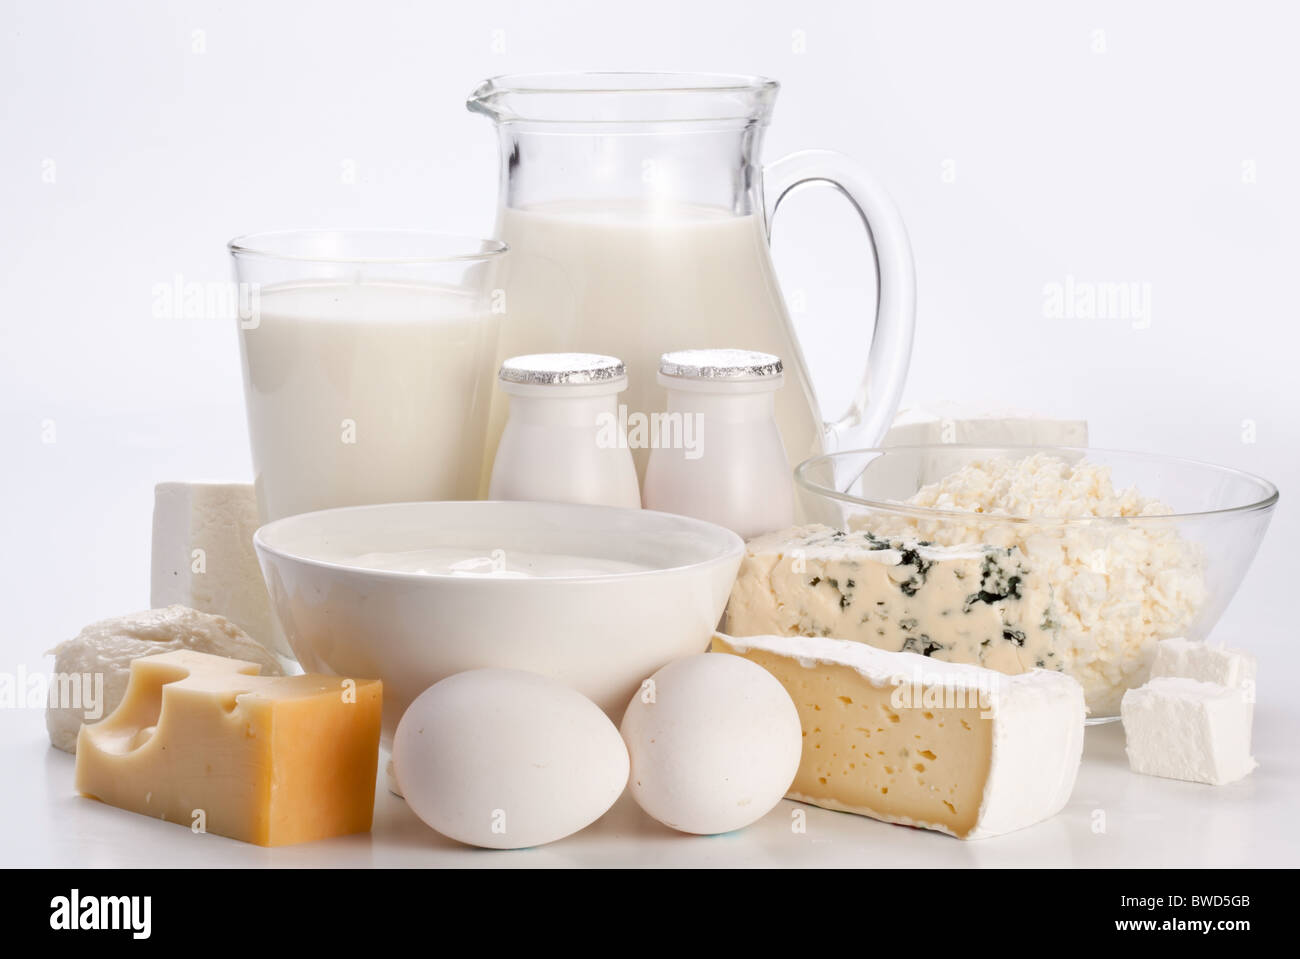 Protein products: cheese, cream, milk, eggs. On a white background. Stock Photo